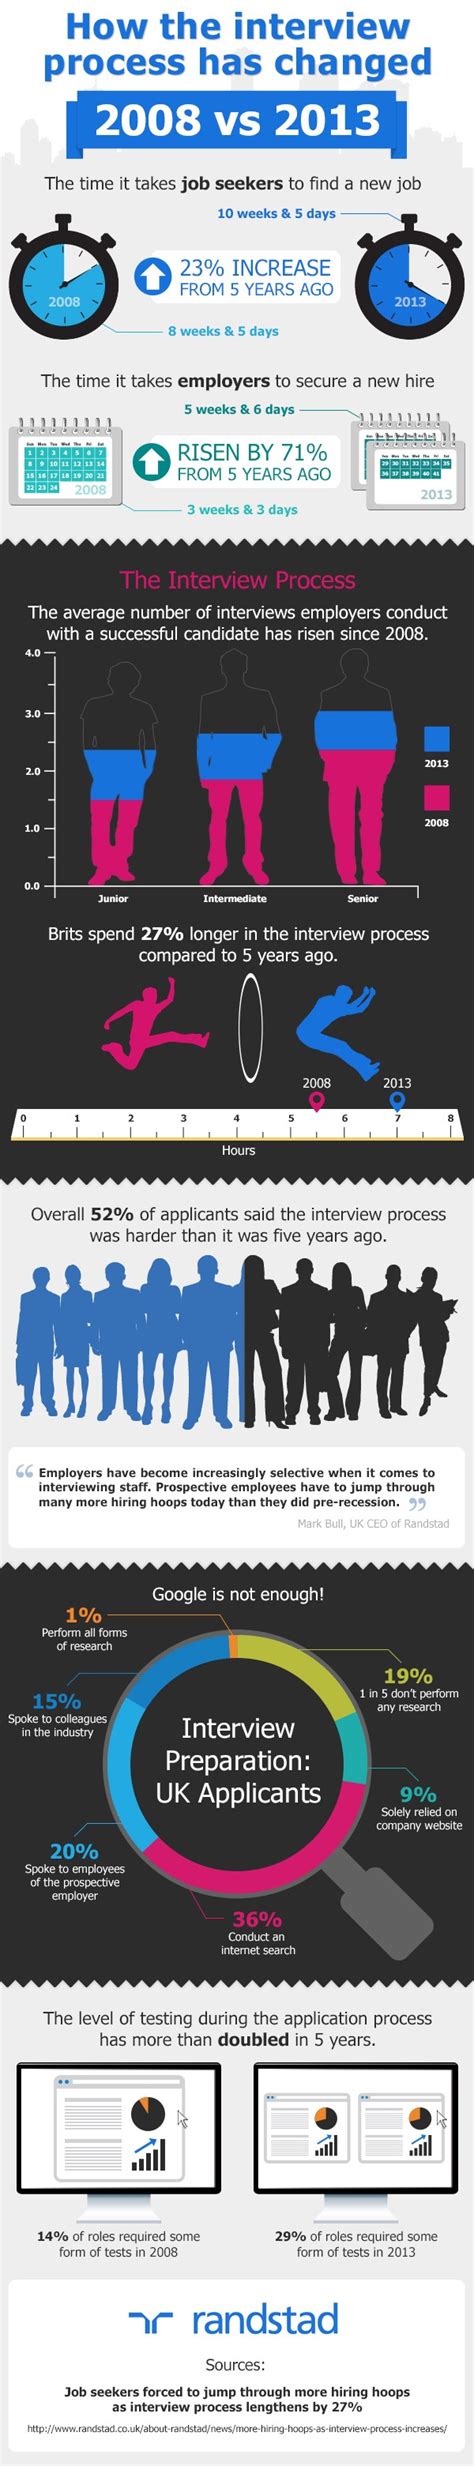 How The Interview Process Has Changed In The Last Five Years